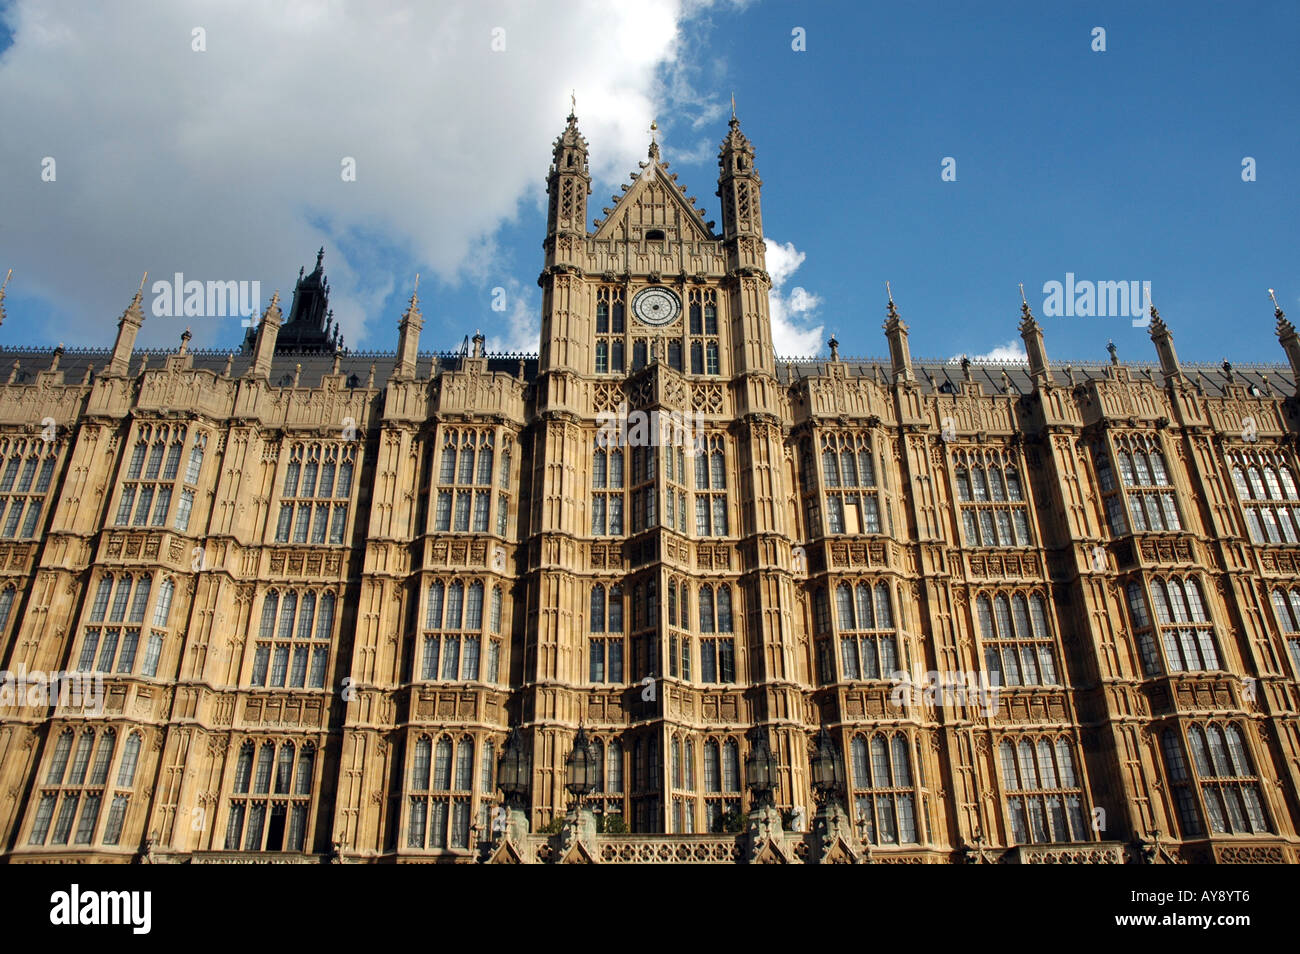 Palace of Westminster also called Houses of Parliament or Westminster Palace in London, UK Stock Photo